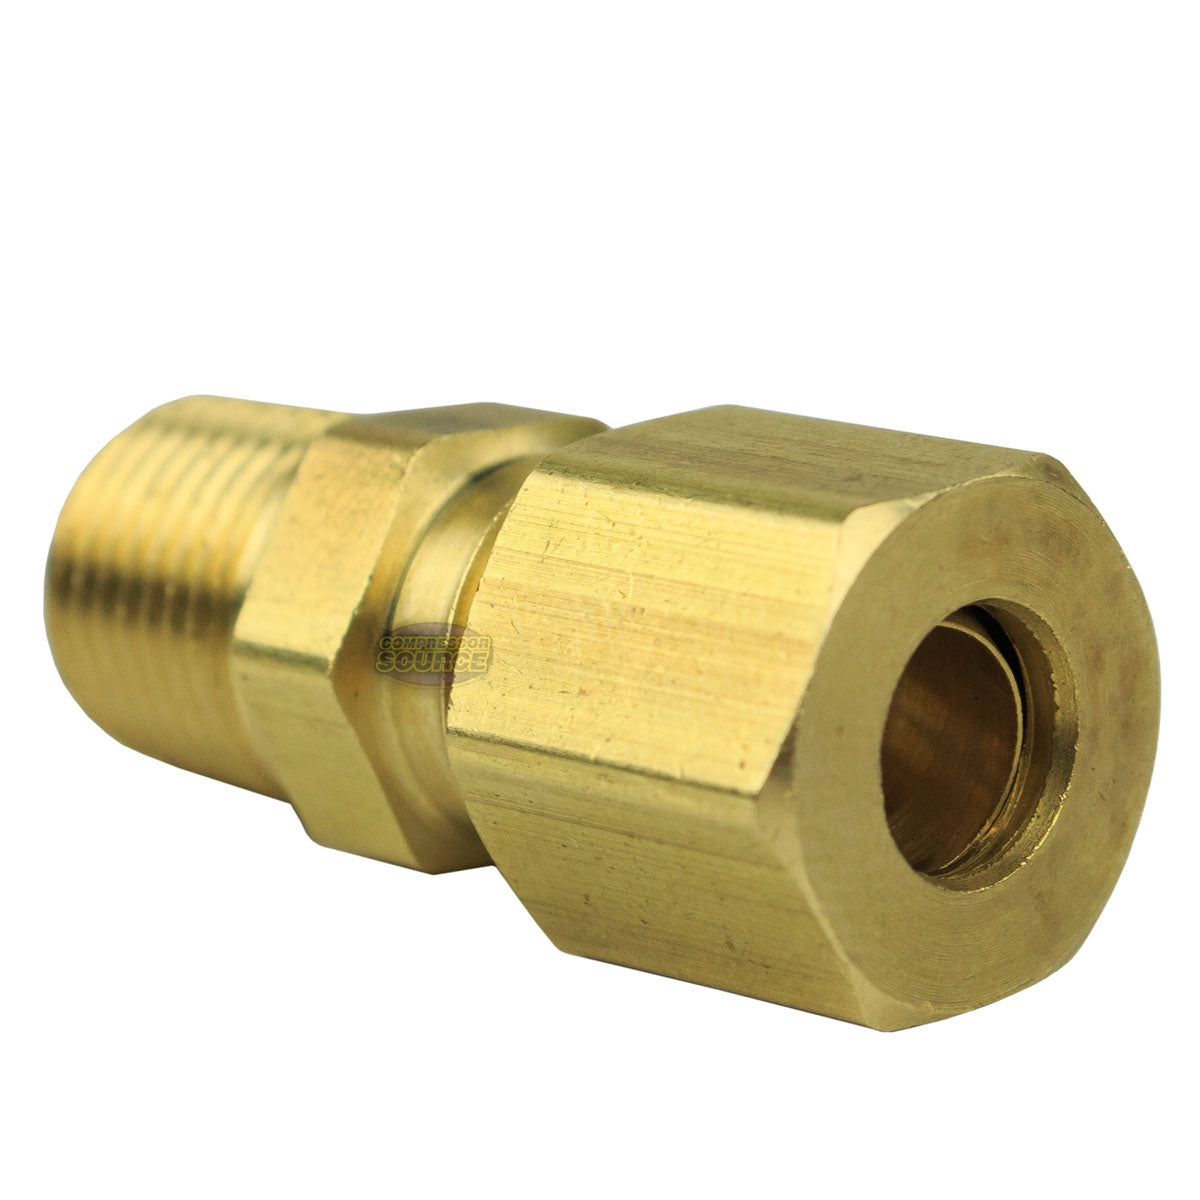 1/4 x 1/8 Compression x Male NPT Adapter Pipe Fitting Tube Connector  Ferrule